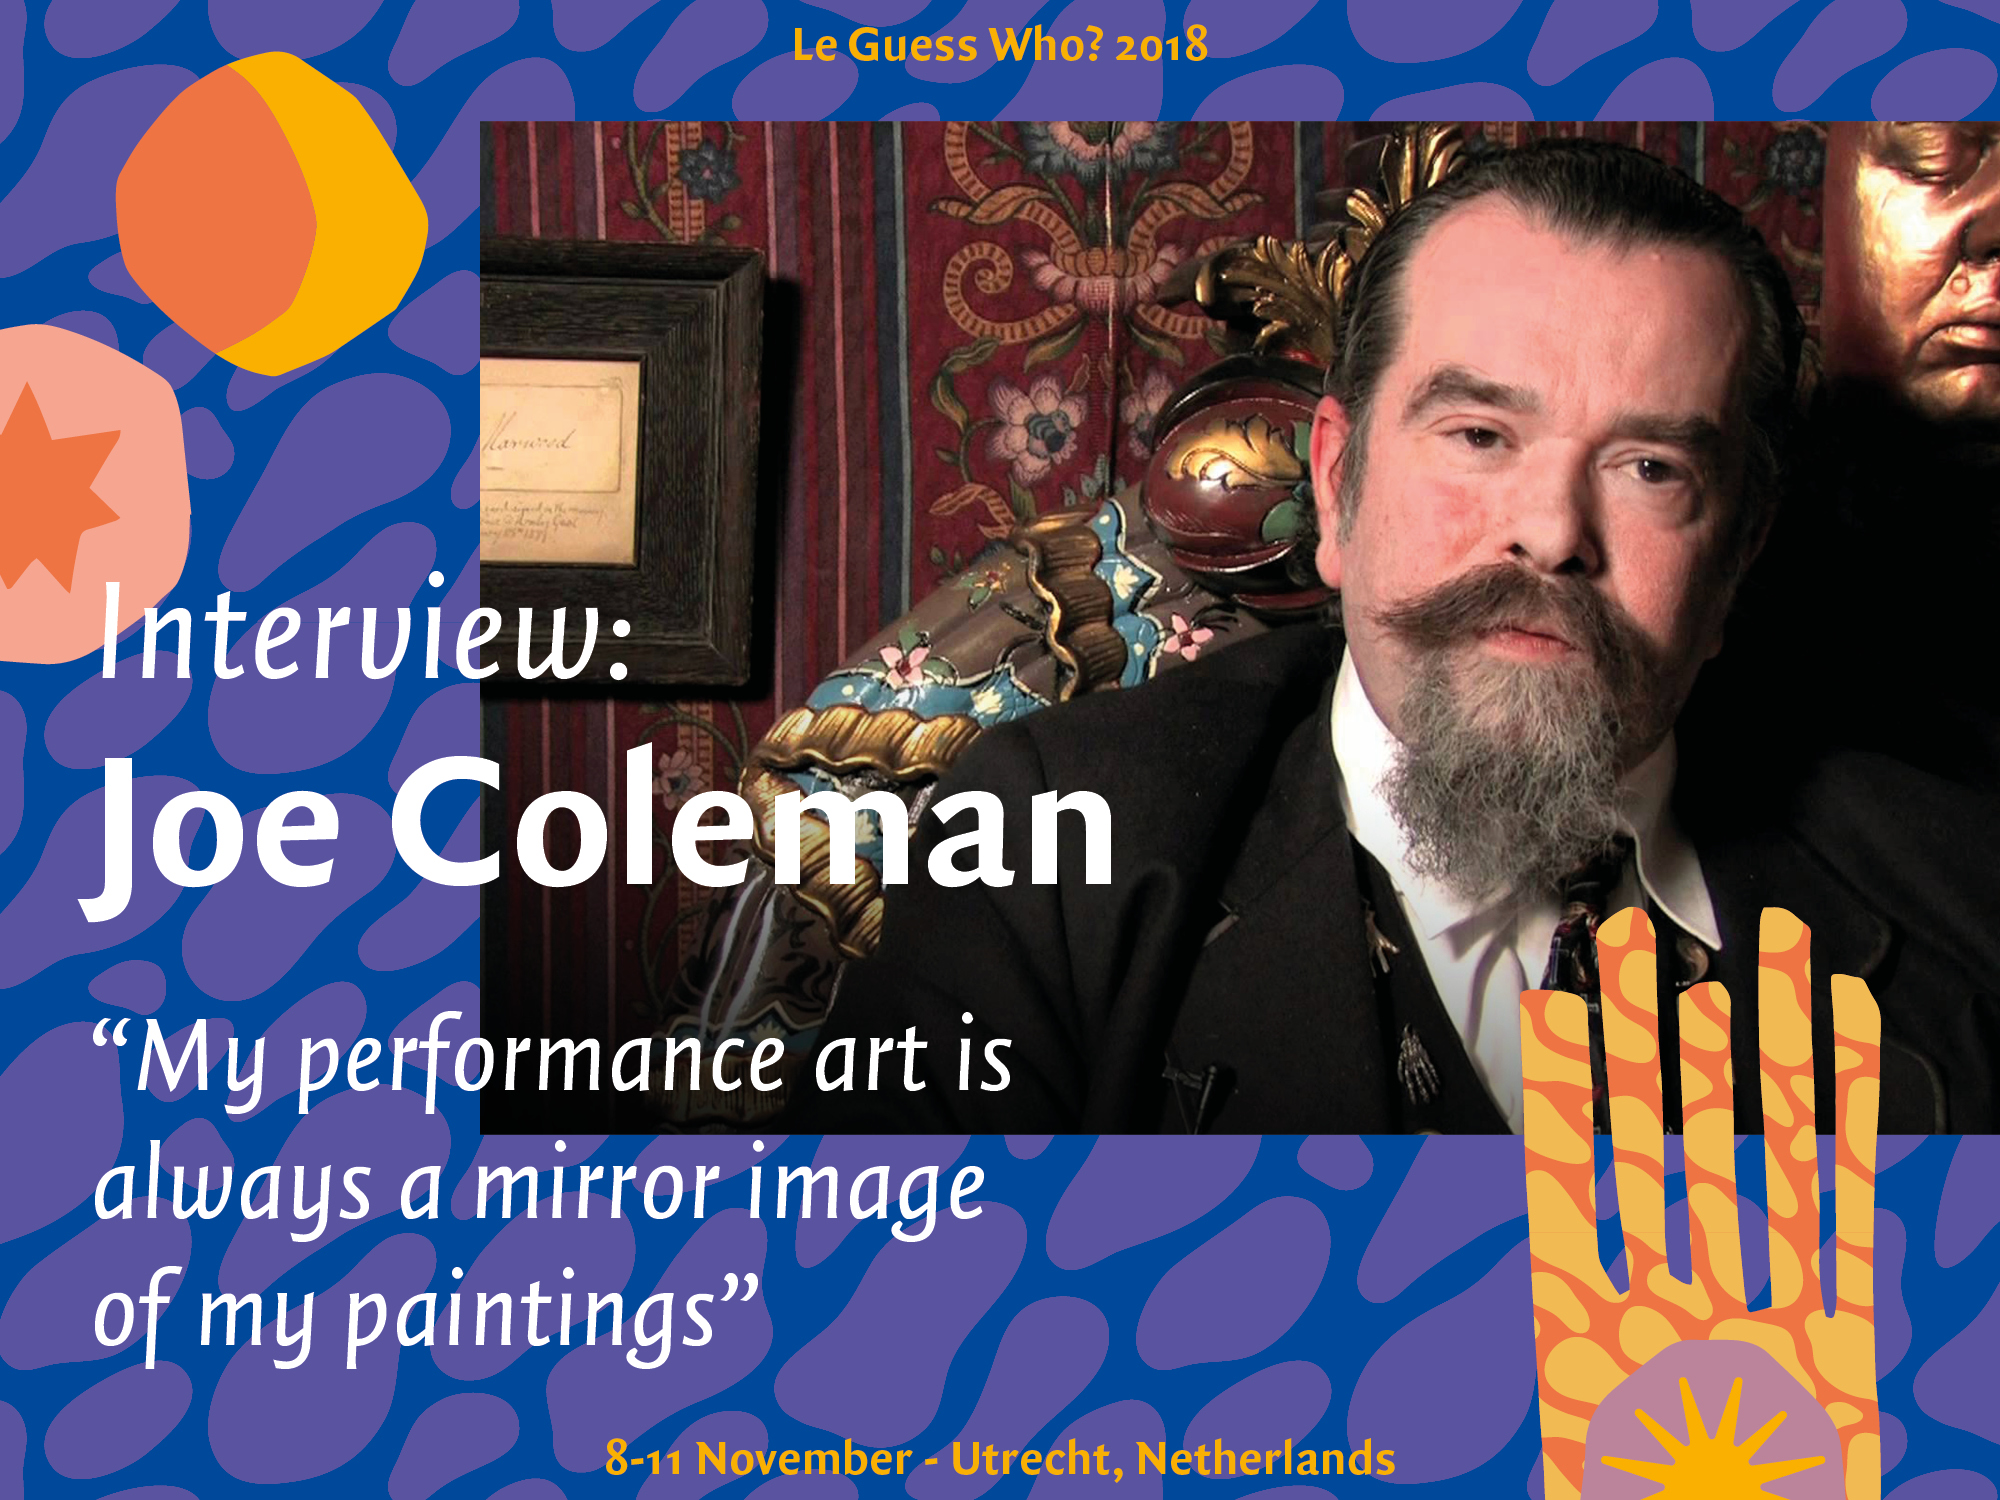 Interview: Joe Coleman: "My performance art is always a mirror image of my paintings" 